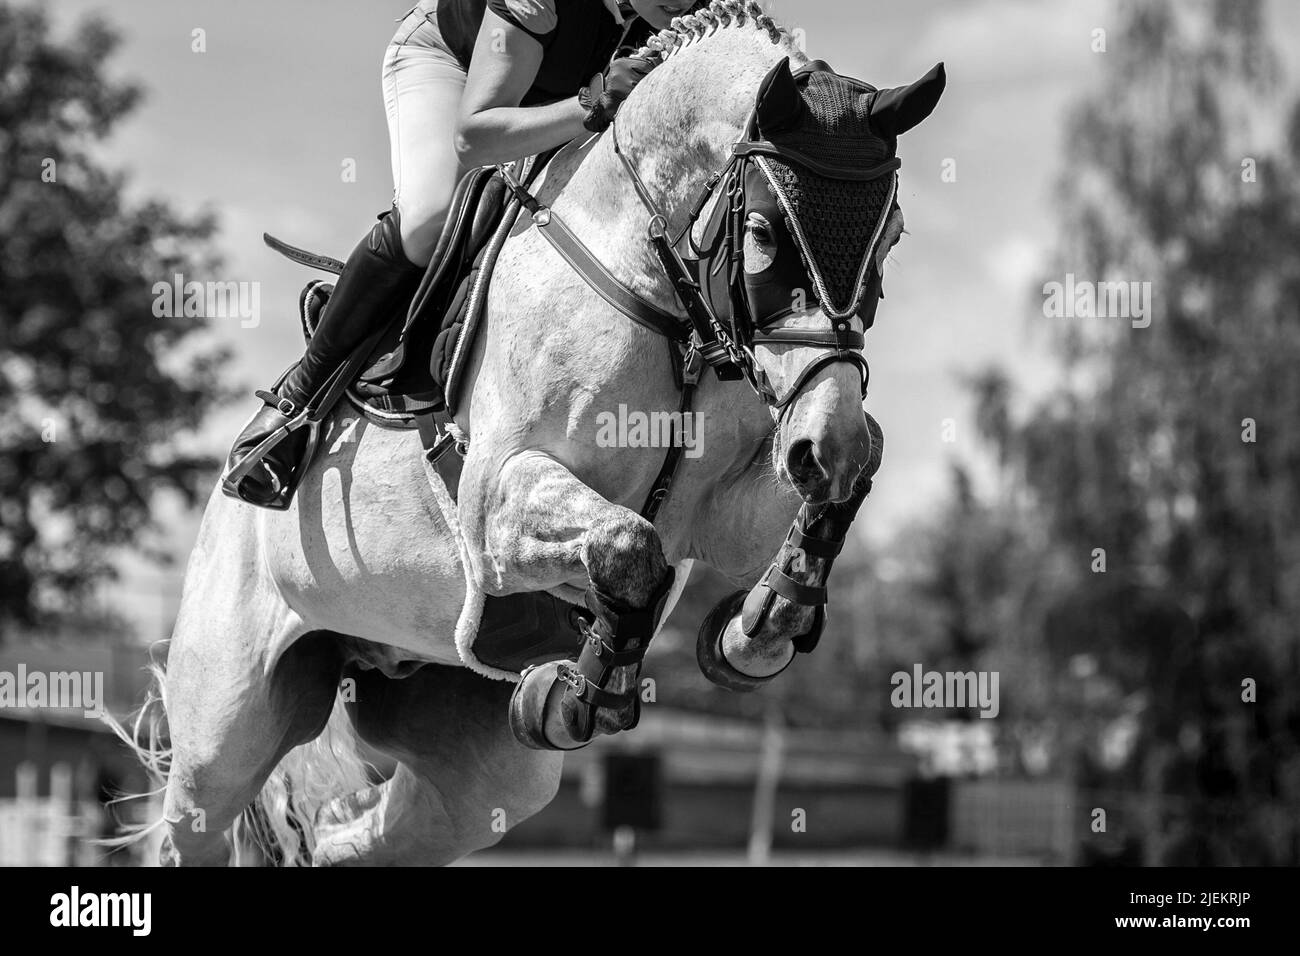 Horse Jumping, Equestrian Sports, Show Jumping themed photograph Stock Photo